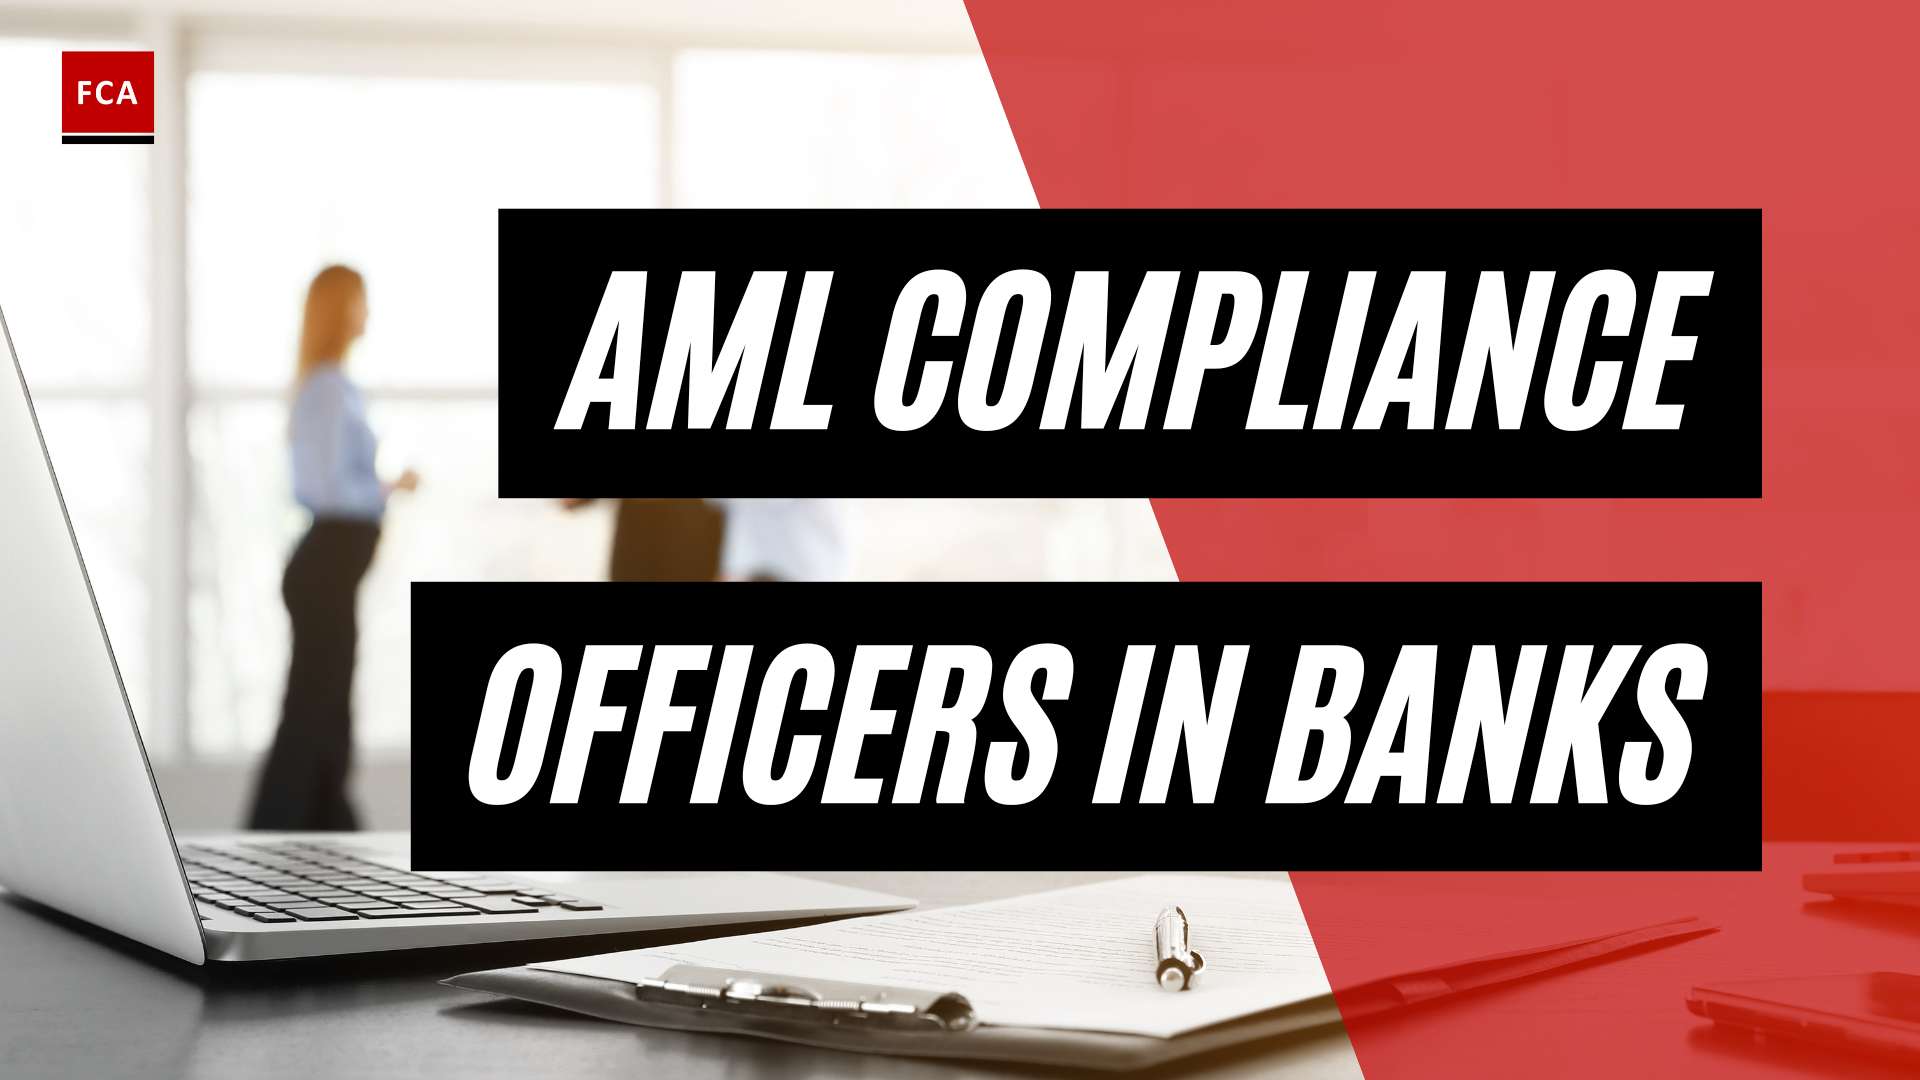 From Detection To Prevention: The Vital Role Of Aml Compliance Officers In Banks